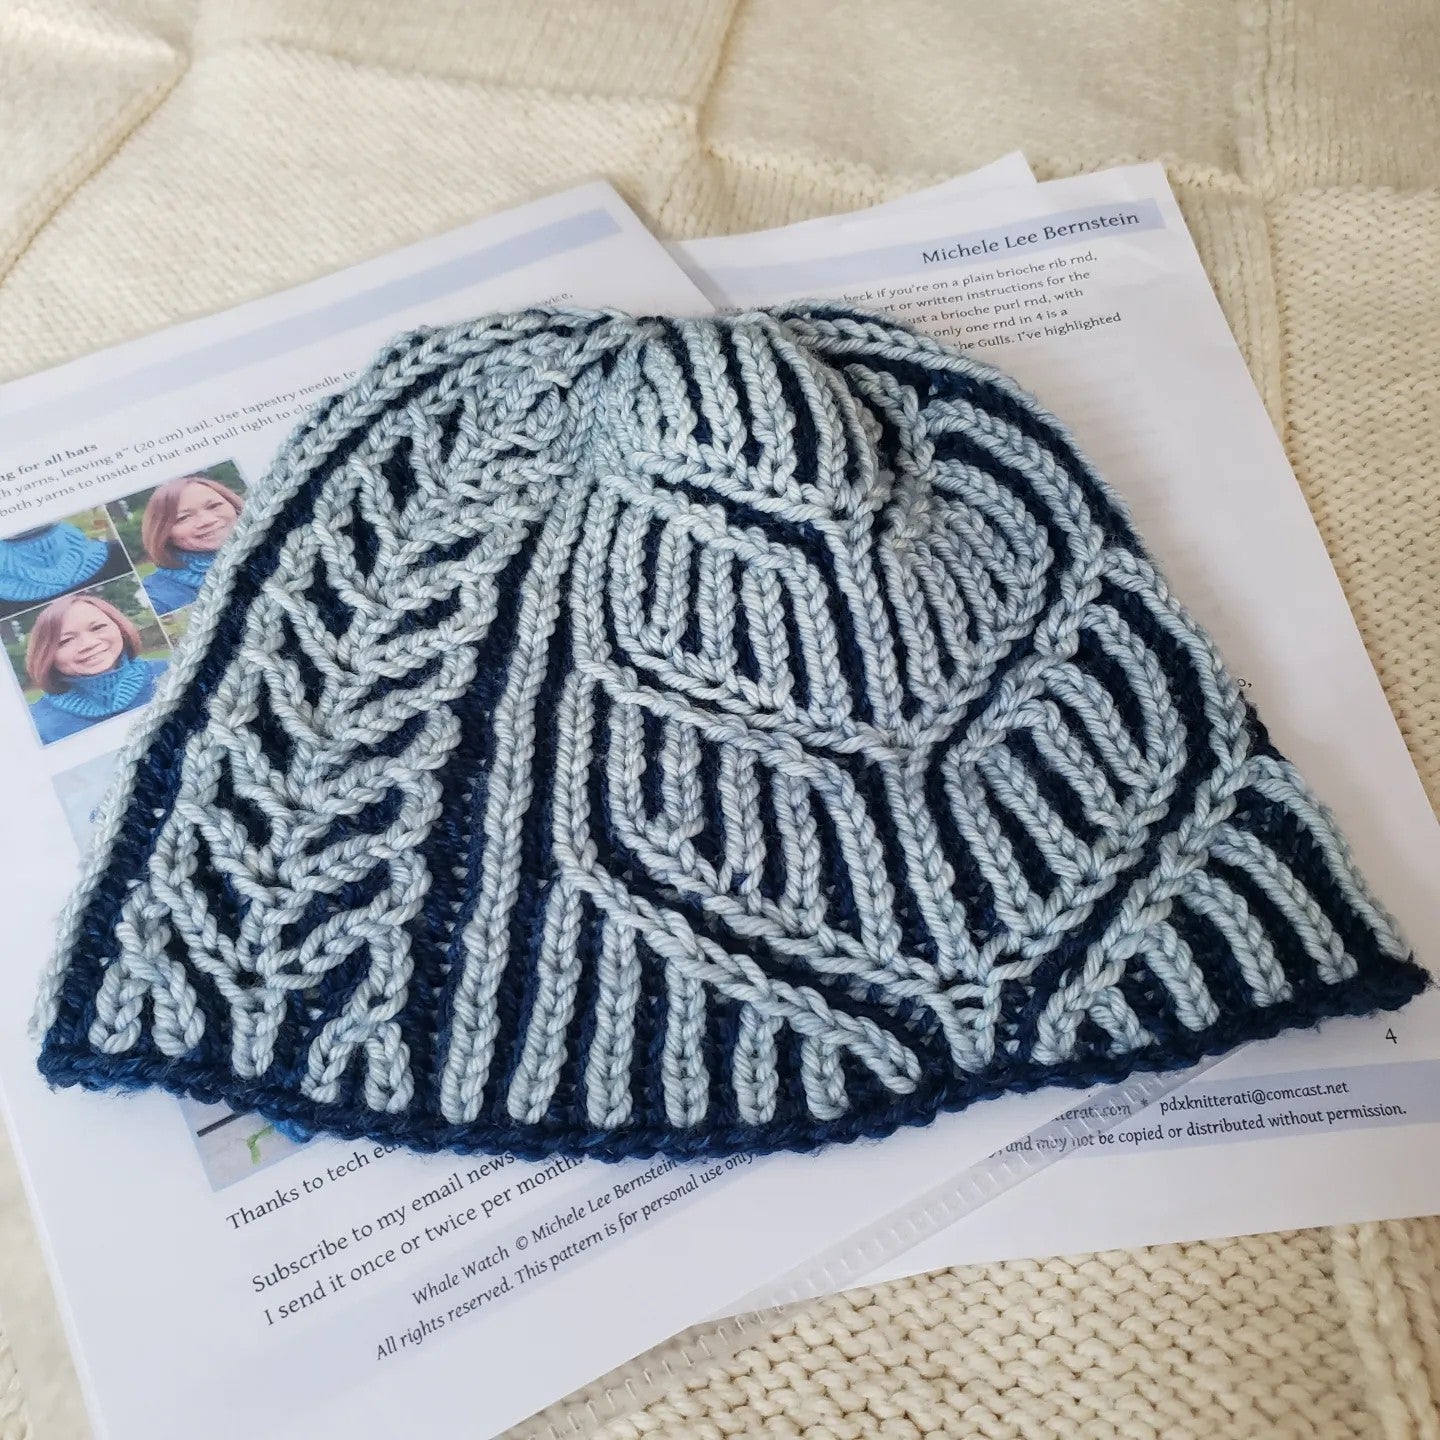 Whale Watch Cap and Cowl